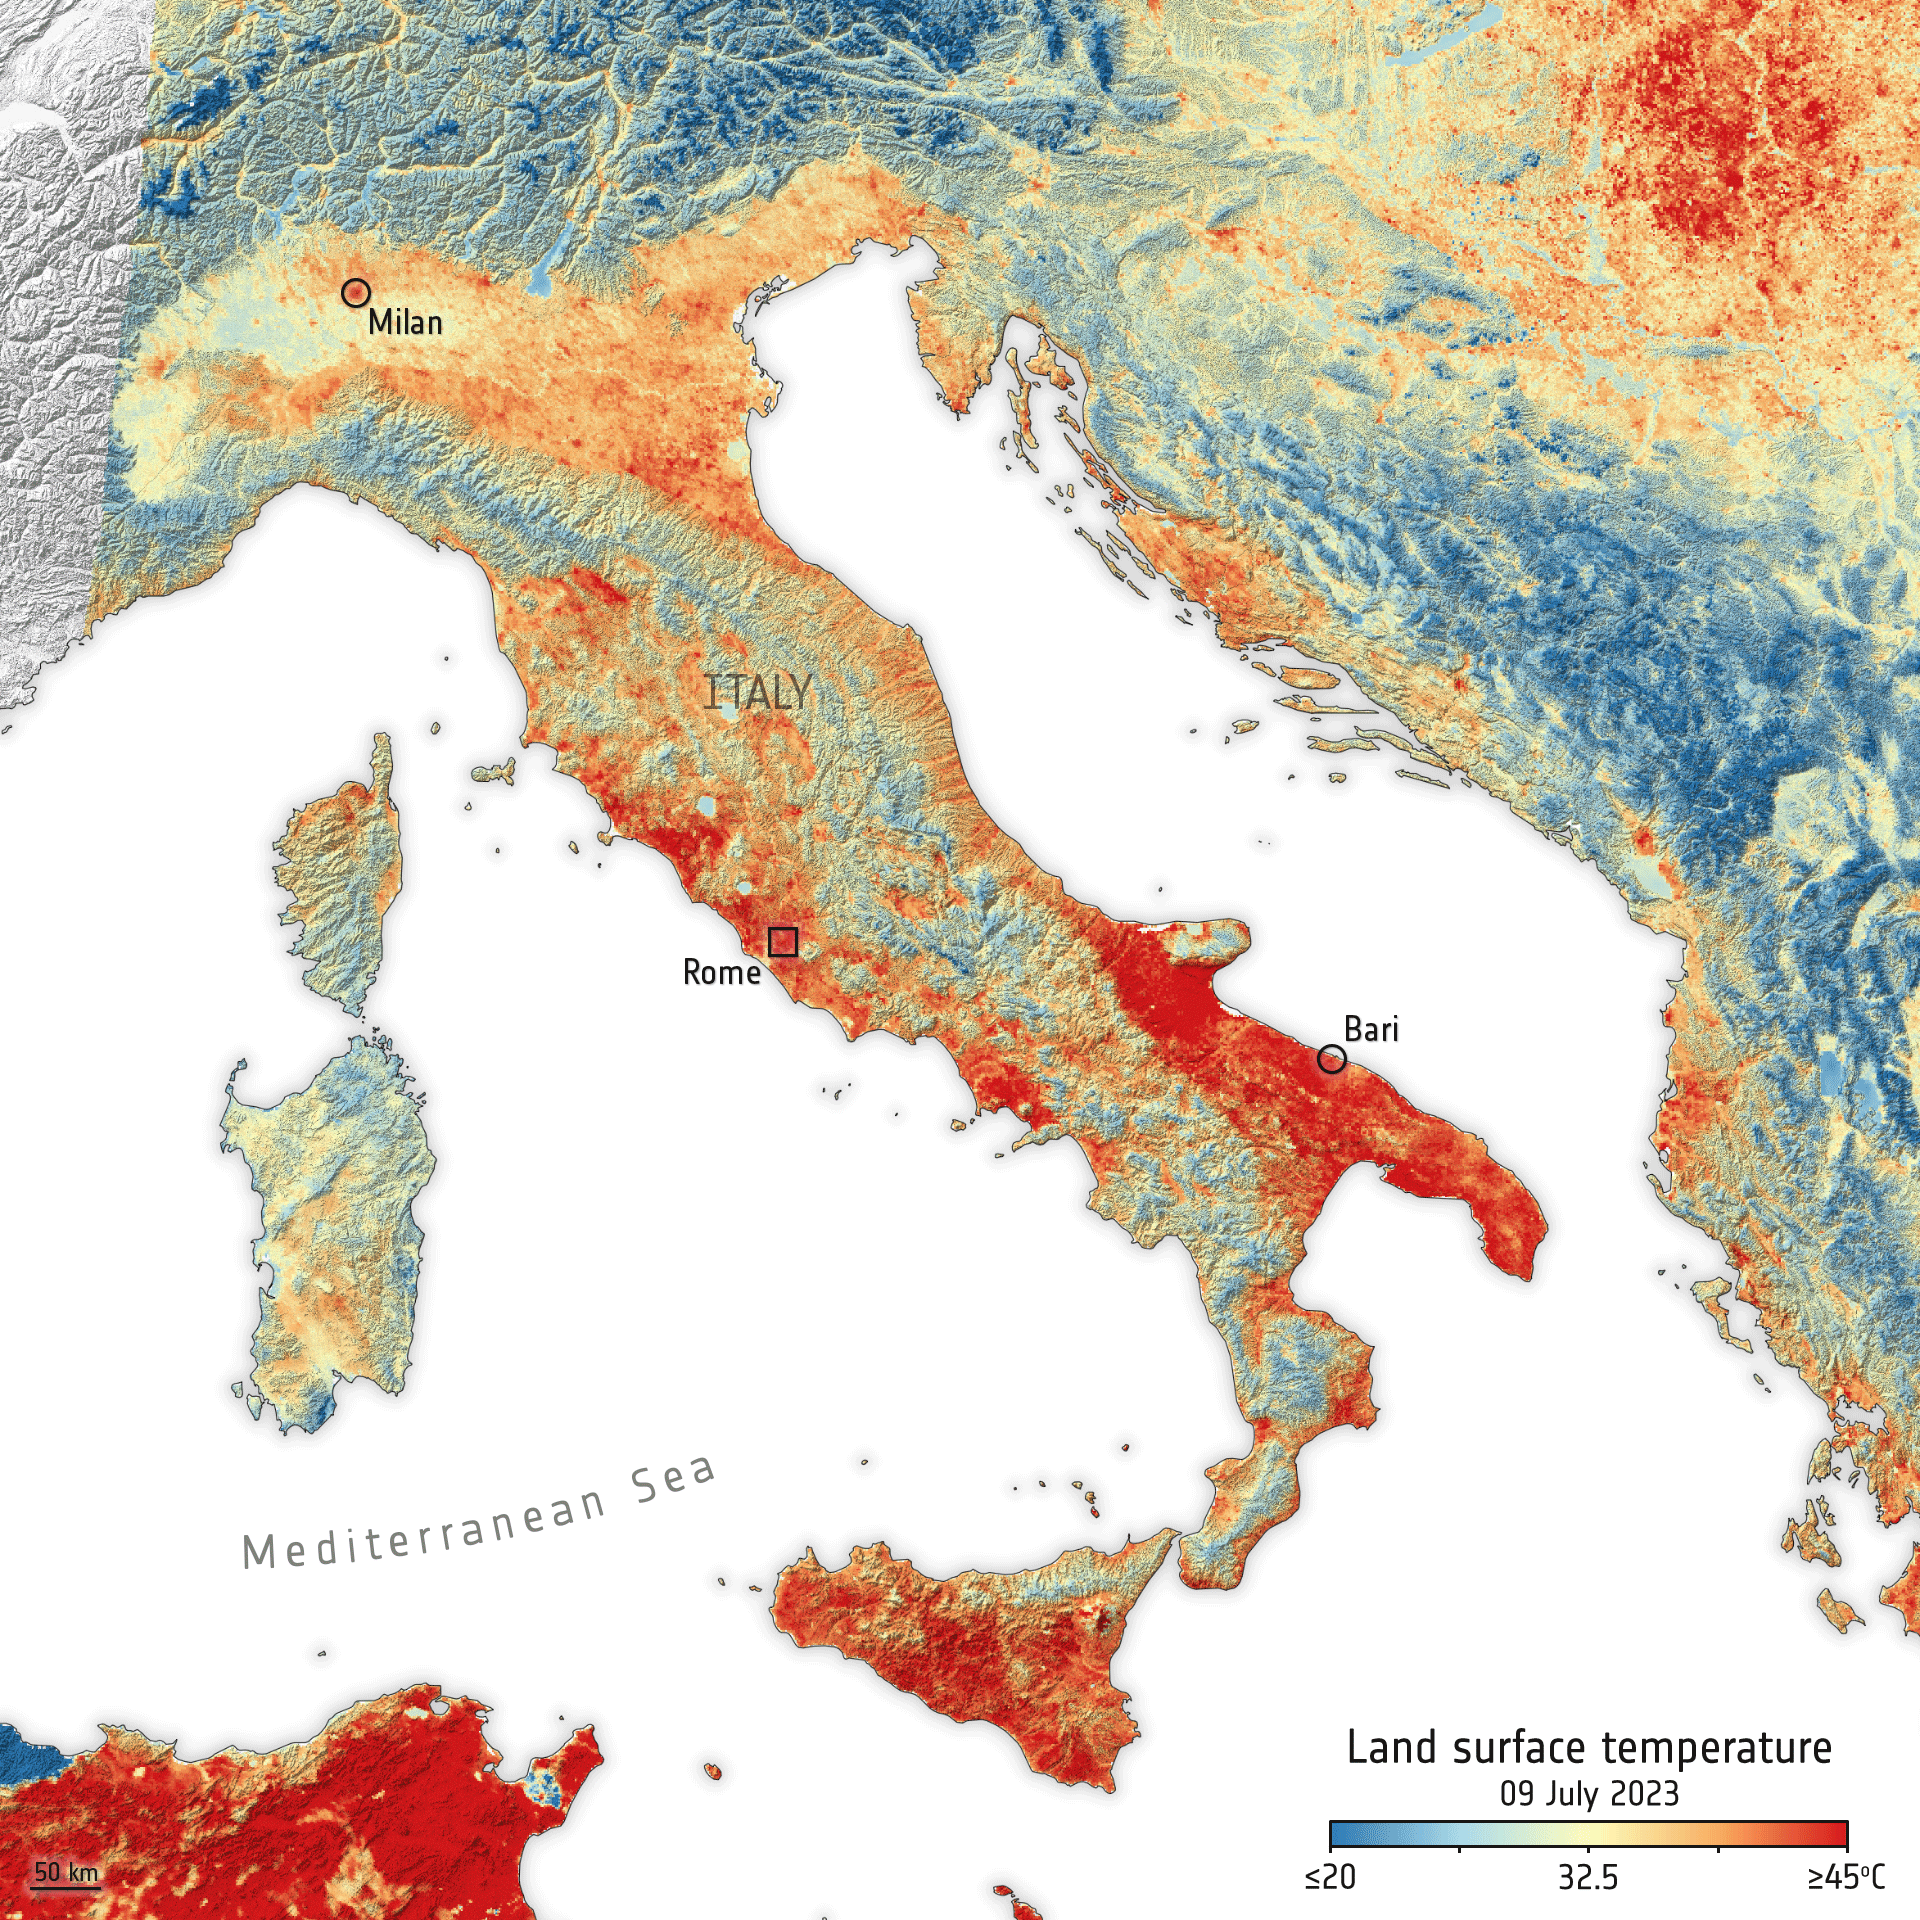 Land-surface temperature in Italy